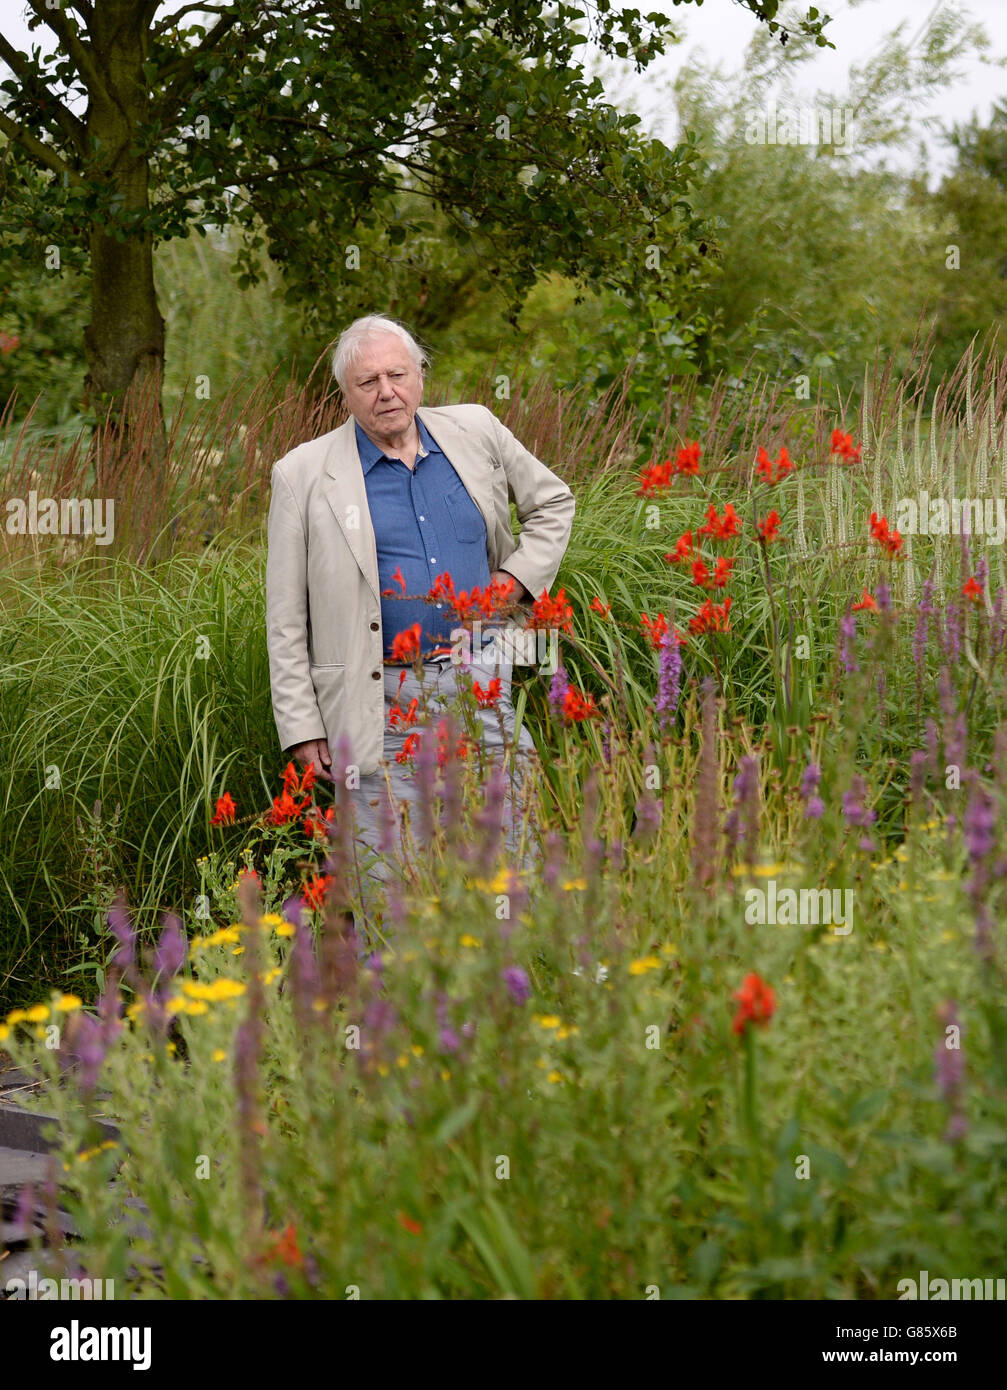 Sir David Attenborough visits the London Wetland Centre in west London where he launched his new campaign to raise public awareness to help reverse the butterfly decline, urging the public to plant butterfly-friendly flowers in their garden to help reverse declining numbers of the insects. Stock Photo